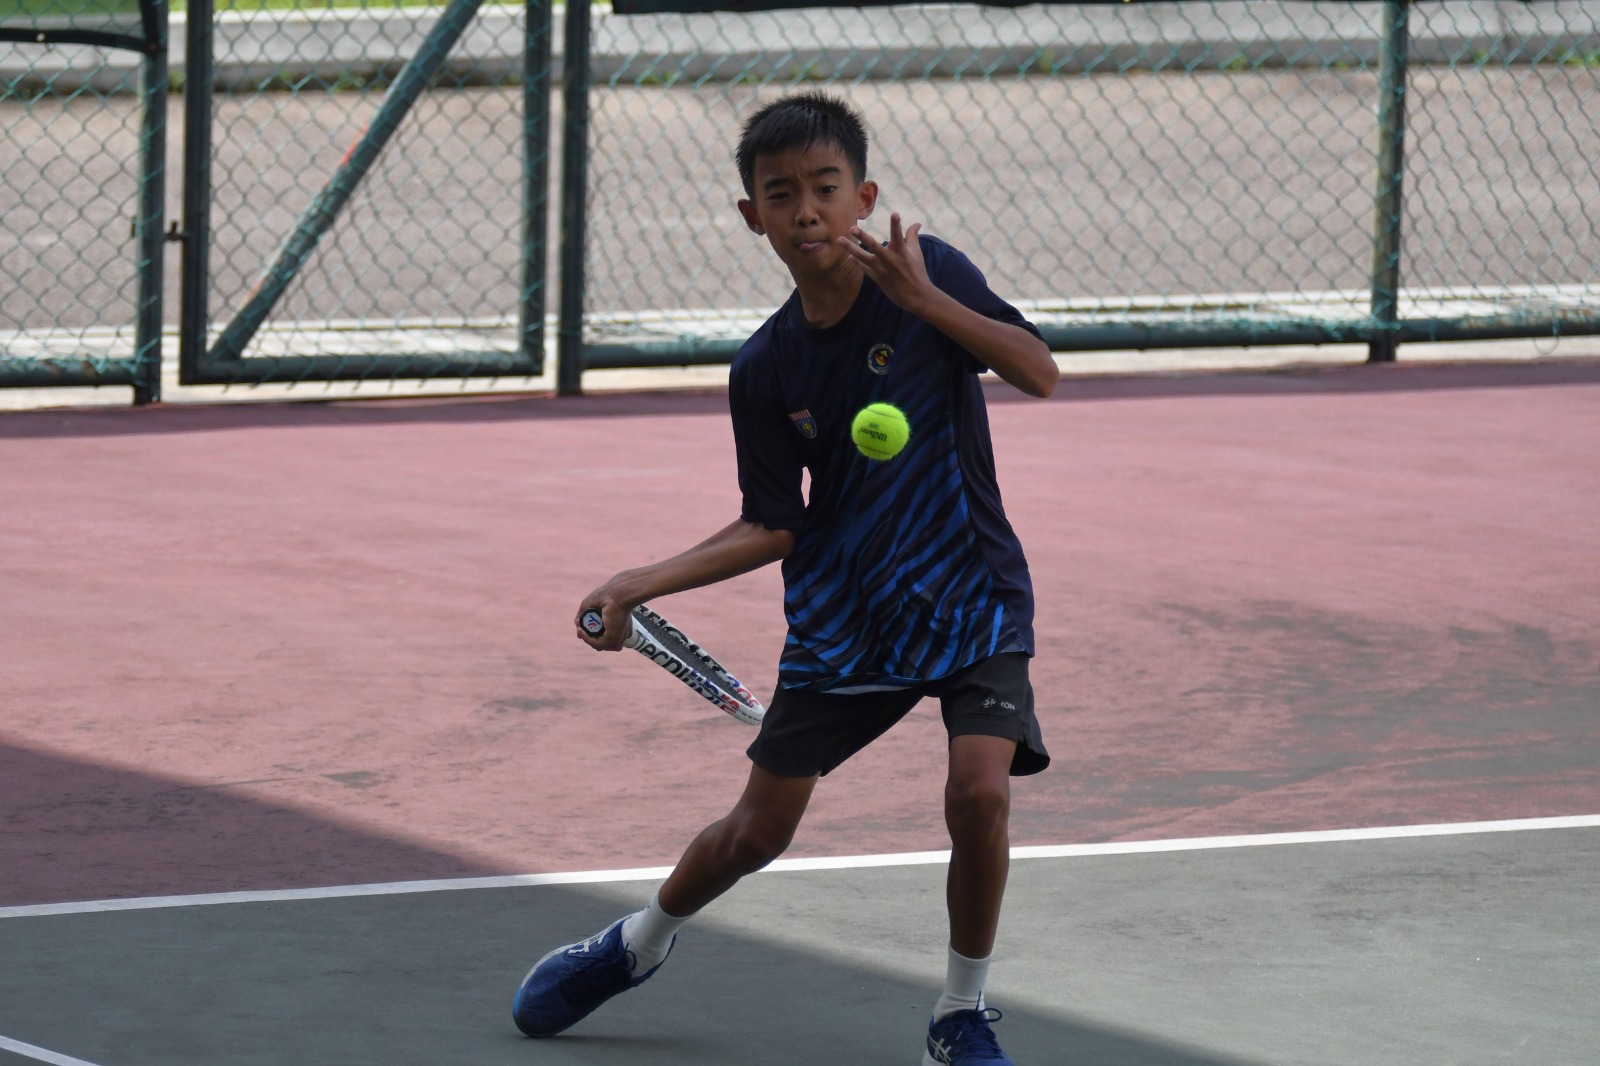 Sarawak’s Ryoga Kho secures another remarkable victory at TennisMalaysia Junior Tour in Johor